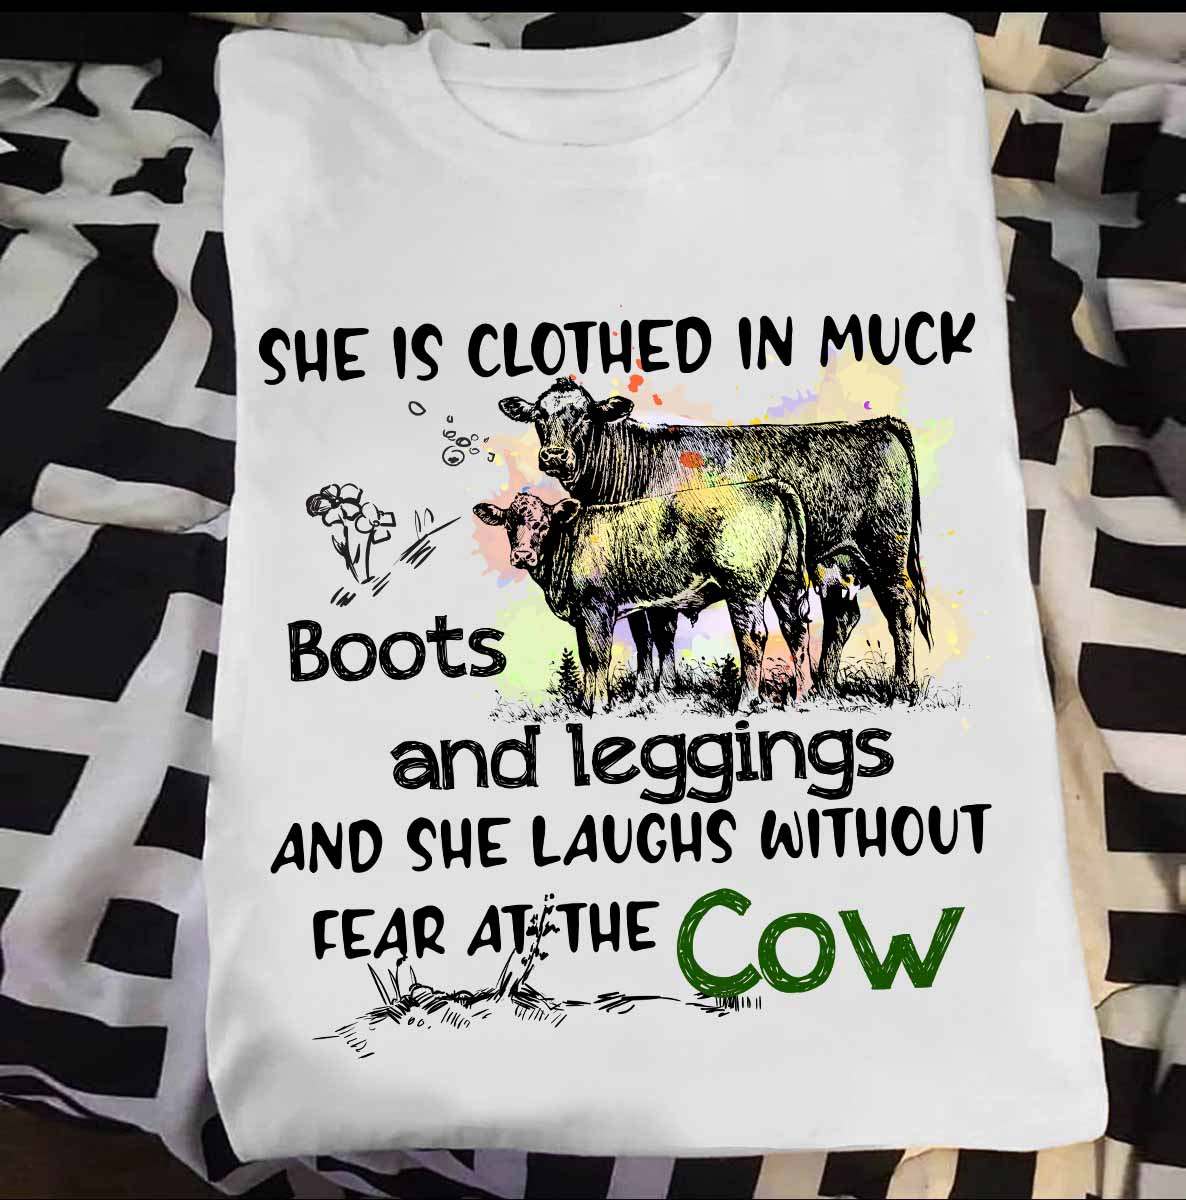 She is clothed in muck boots and legging and she laughs without fear at the cow - Woman loves cows